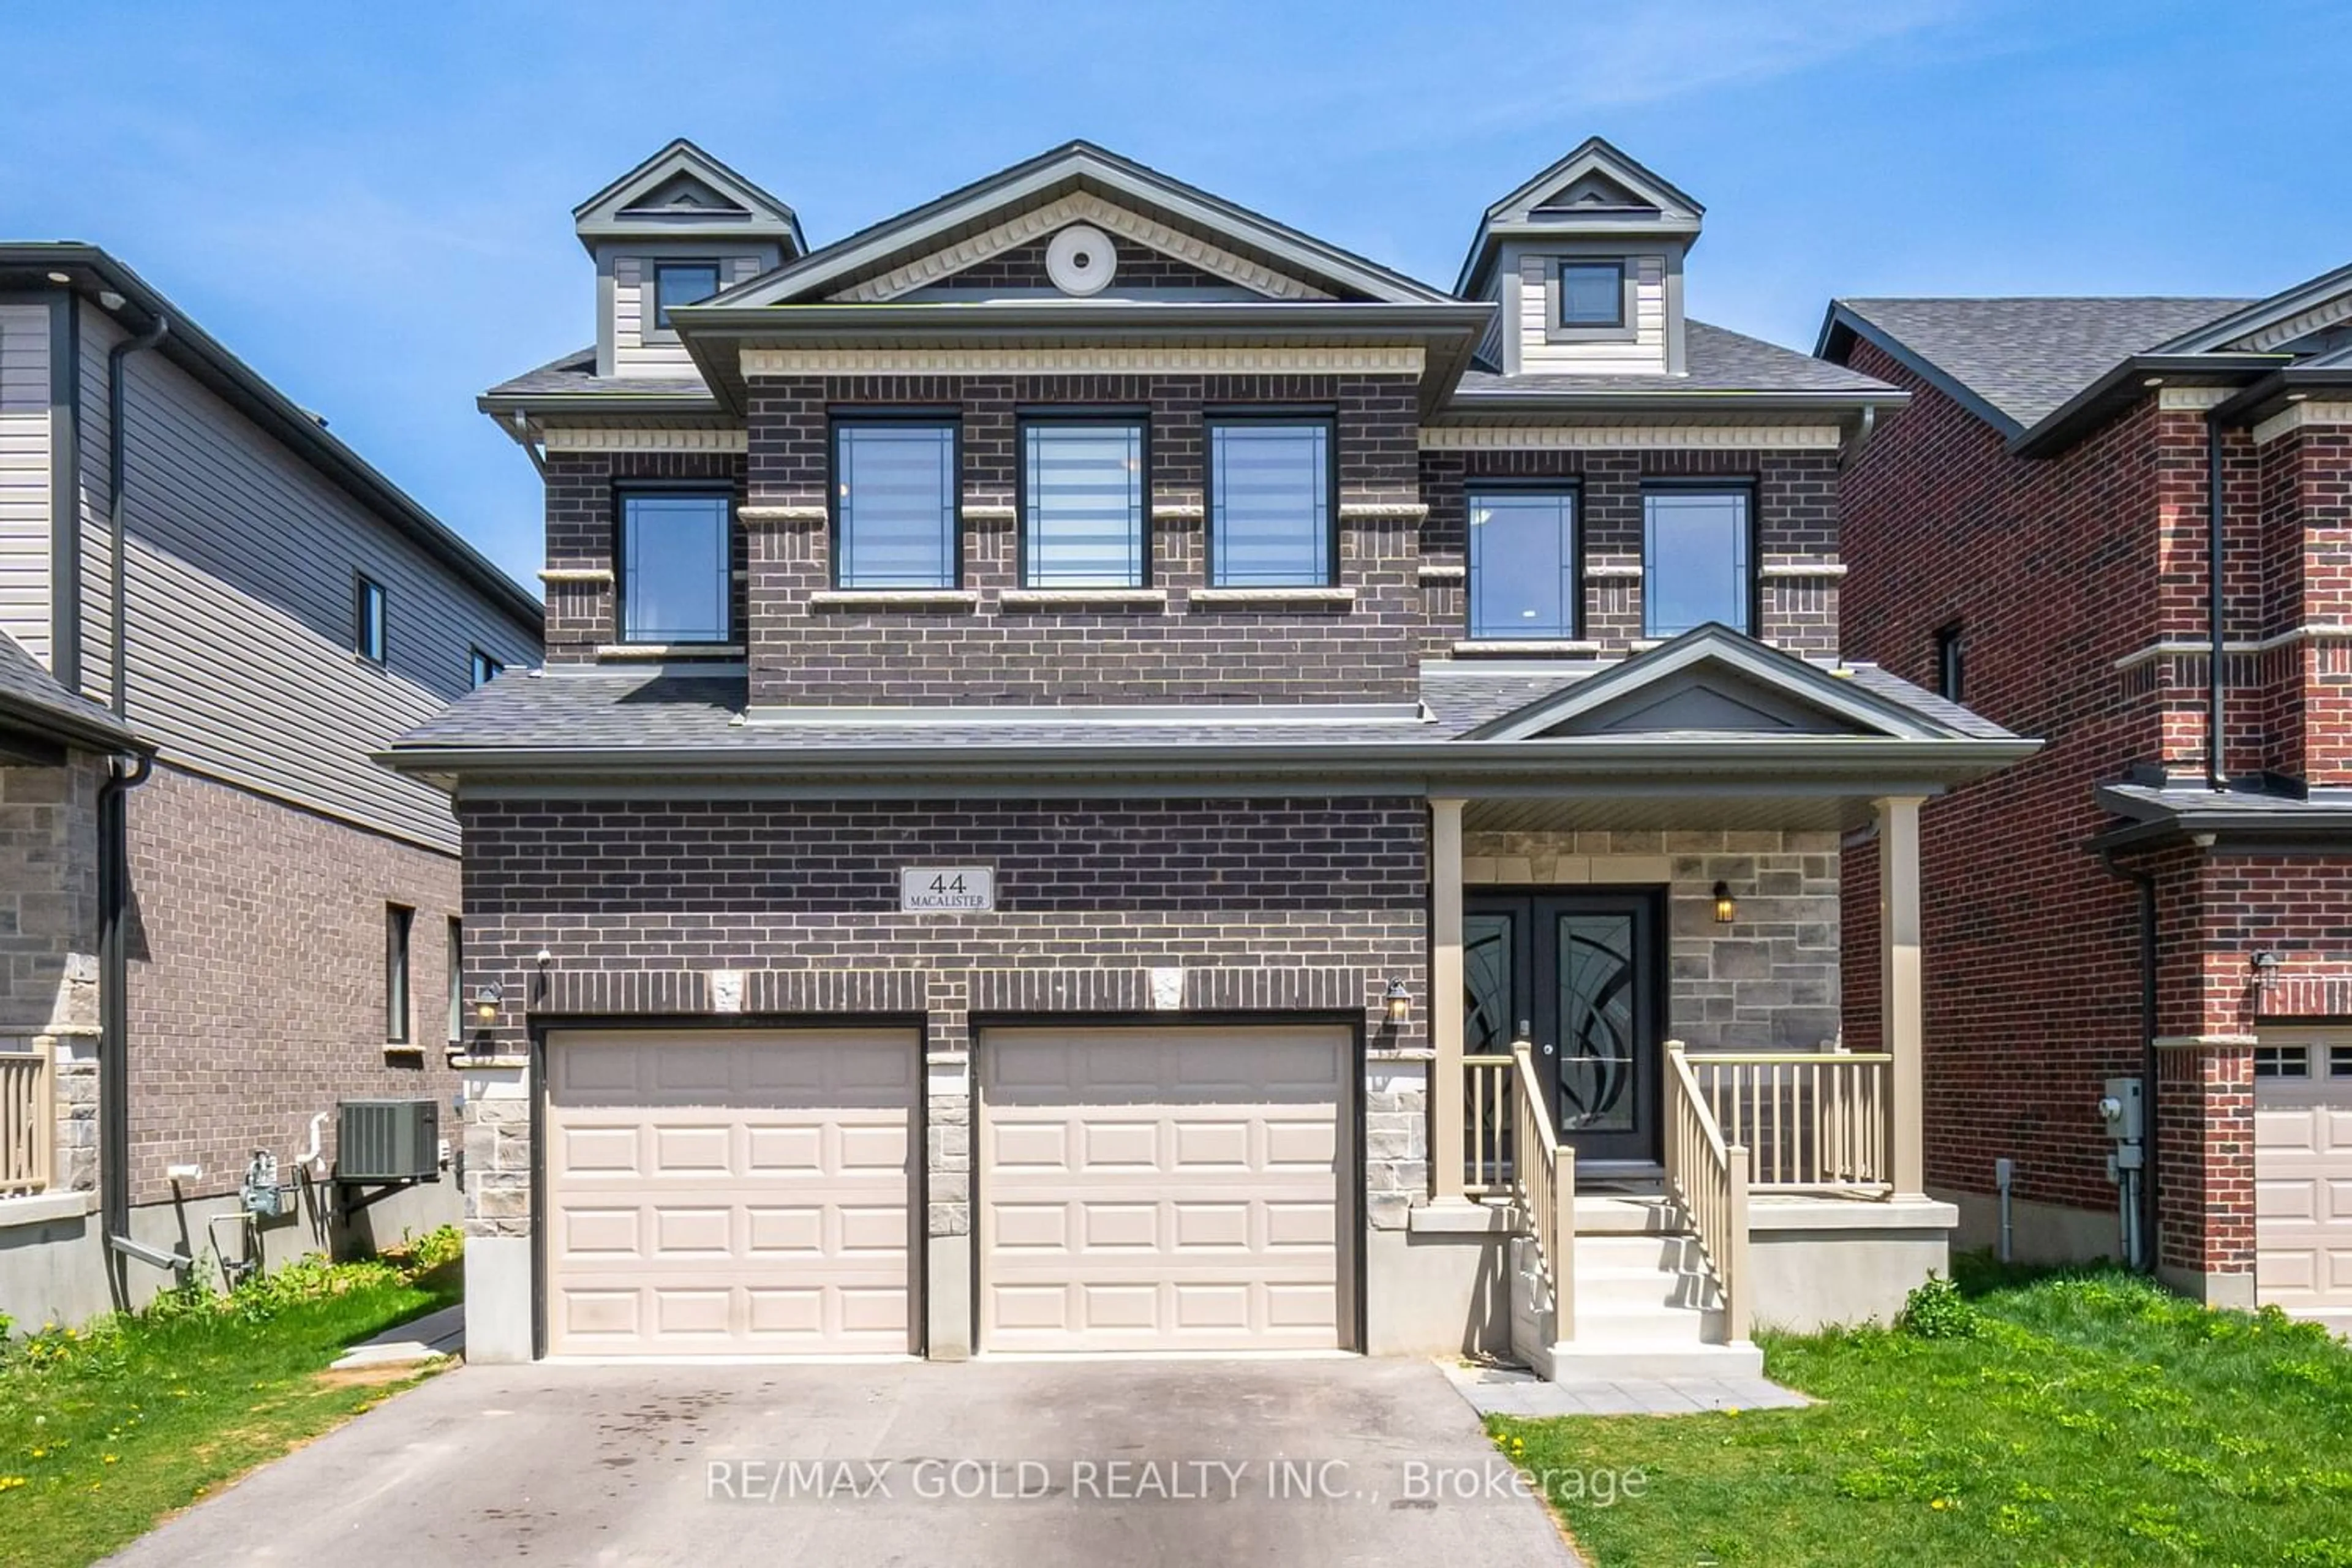 Home with brick exterior material for 44 Macalister Blvd, Guelph Ontario N1L 1B3